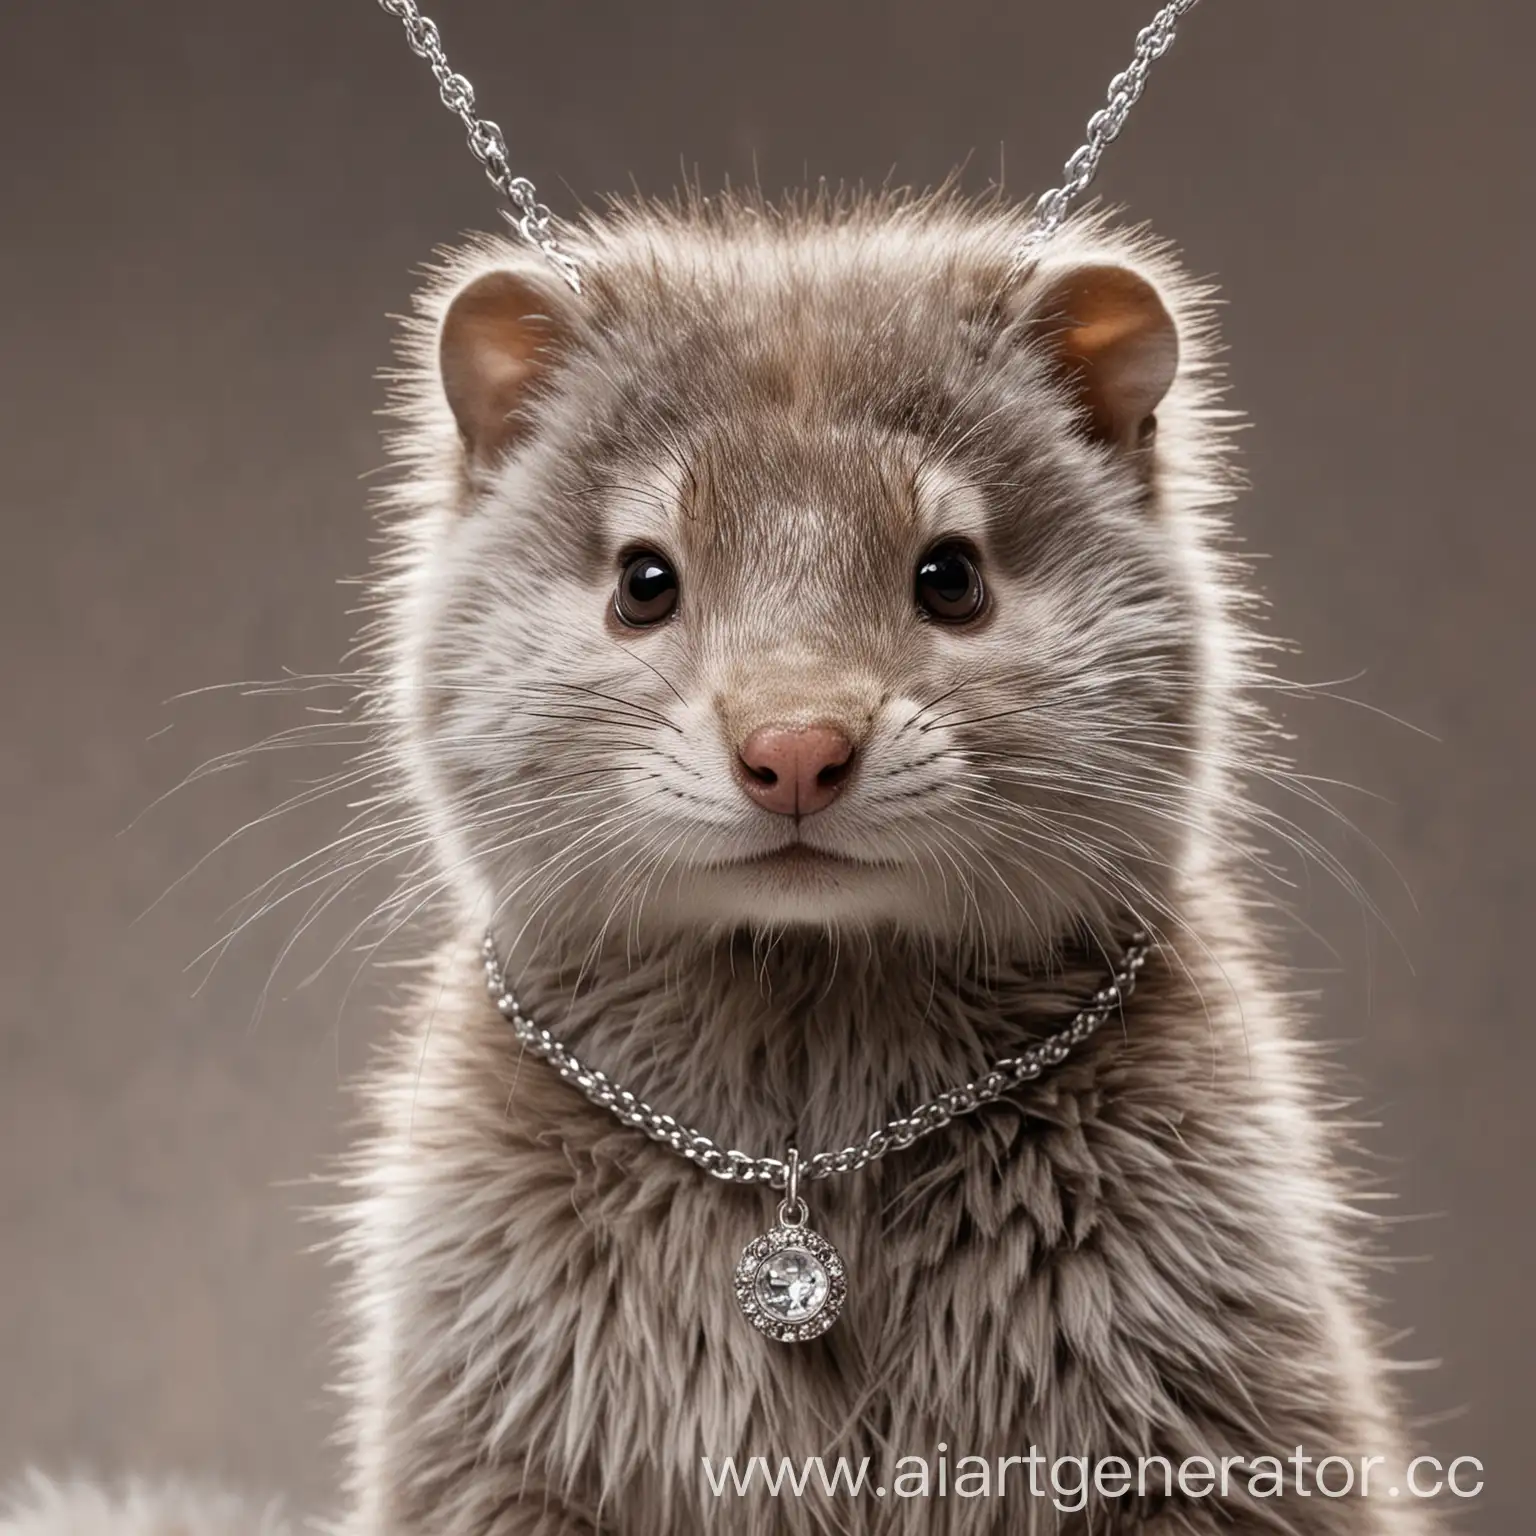 Adorable-Gray-MinkMunk-Wearing-a-Stylish-Necklace